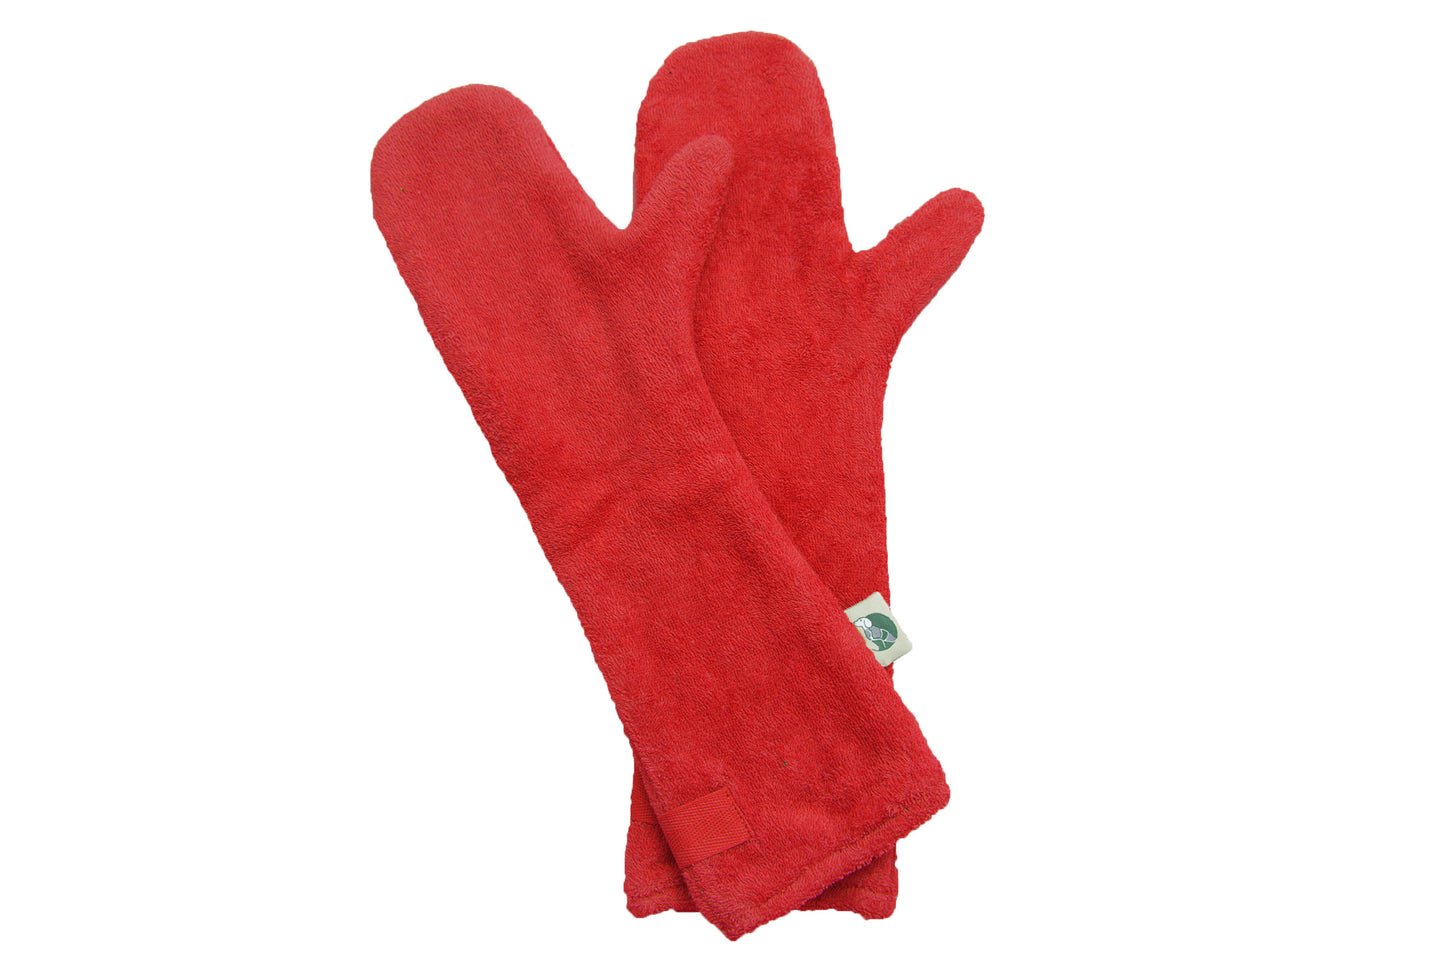 Ruff & Tumble - Drying Mitts - All Colours